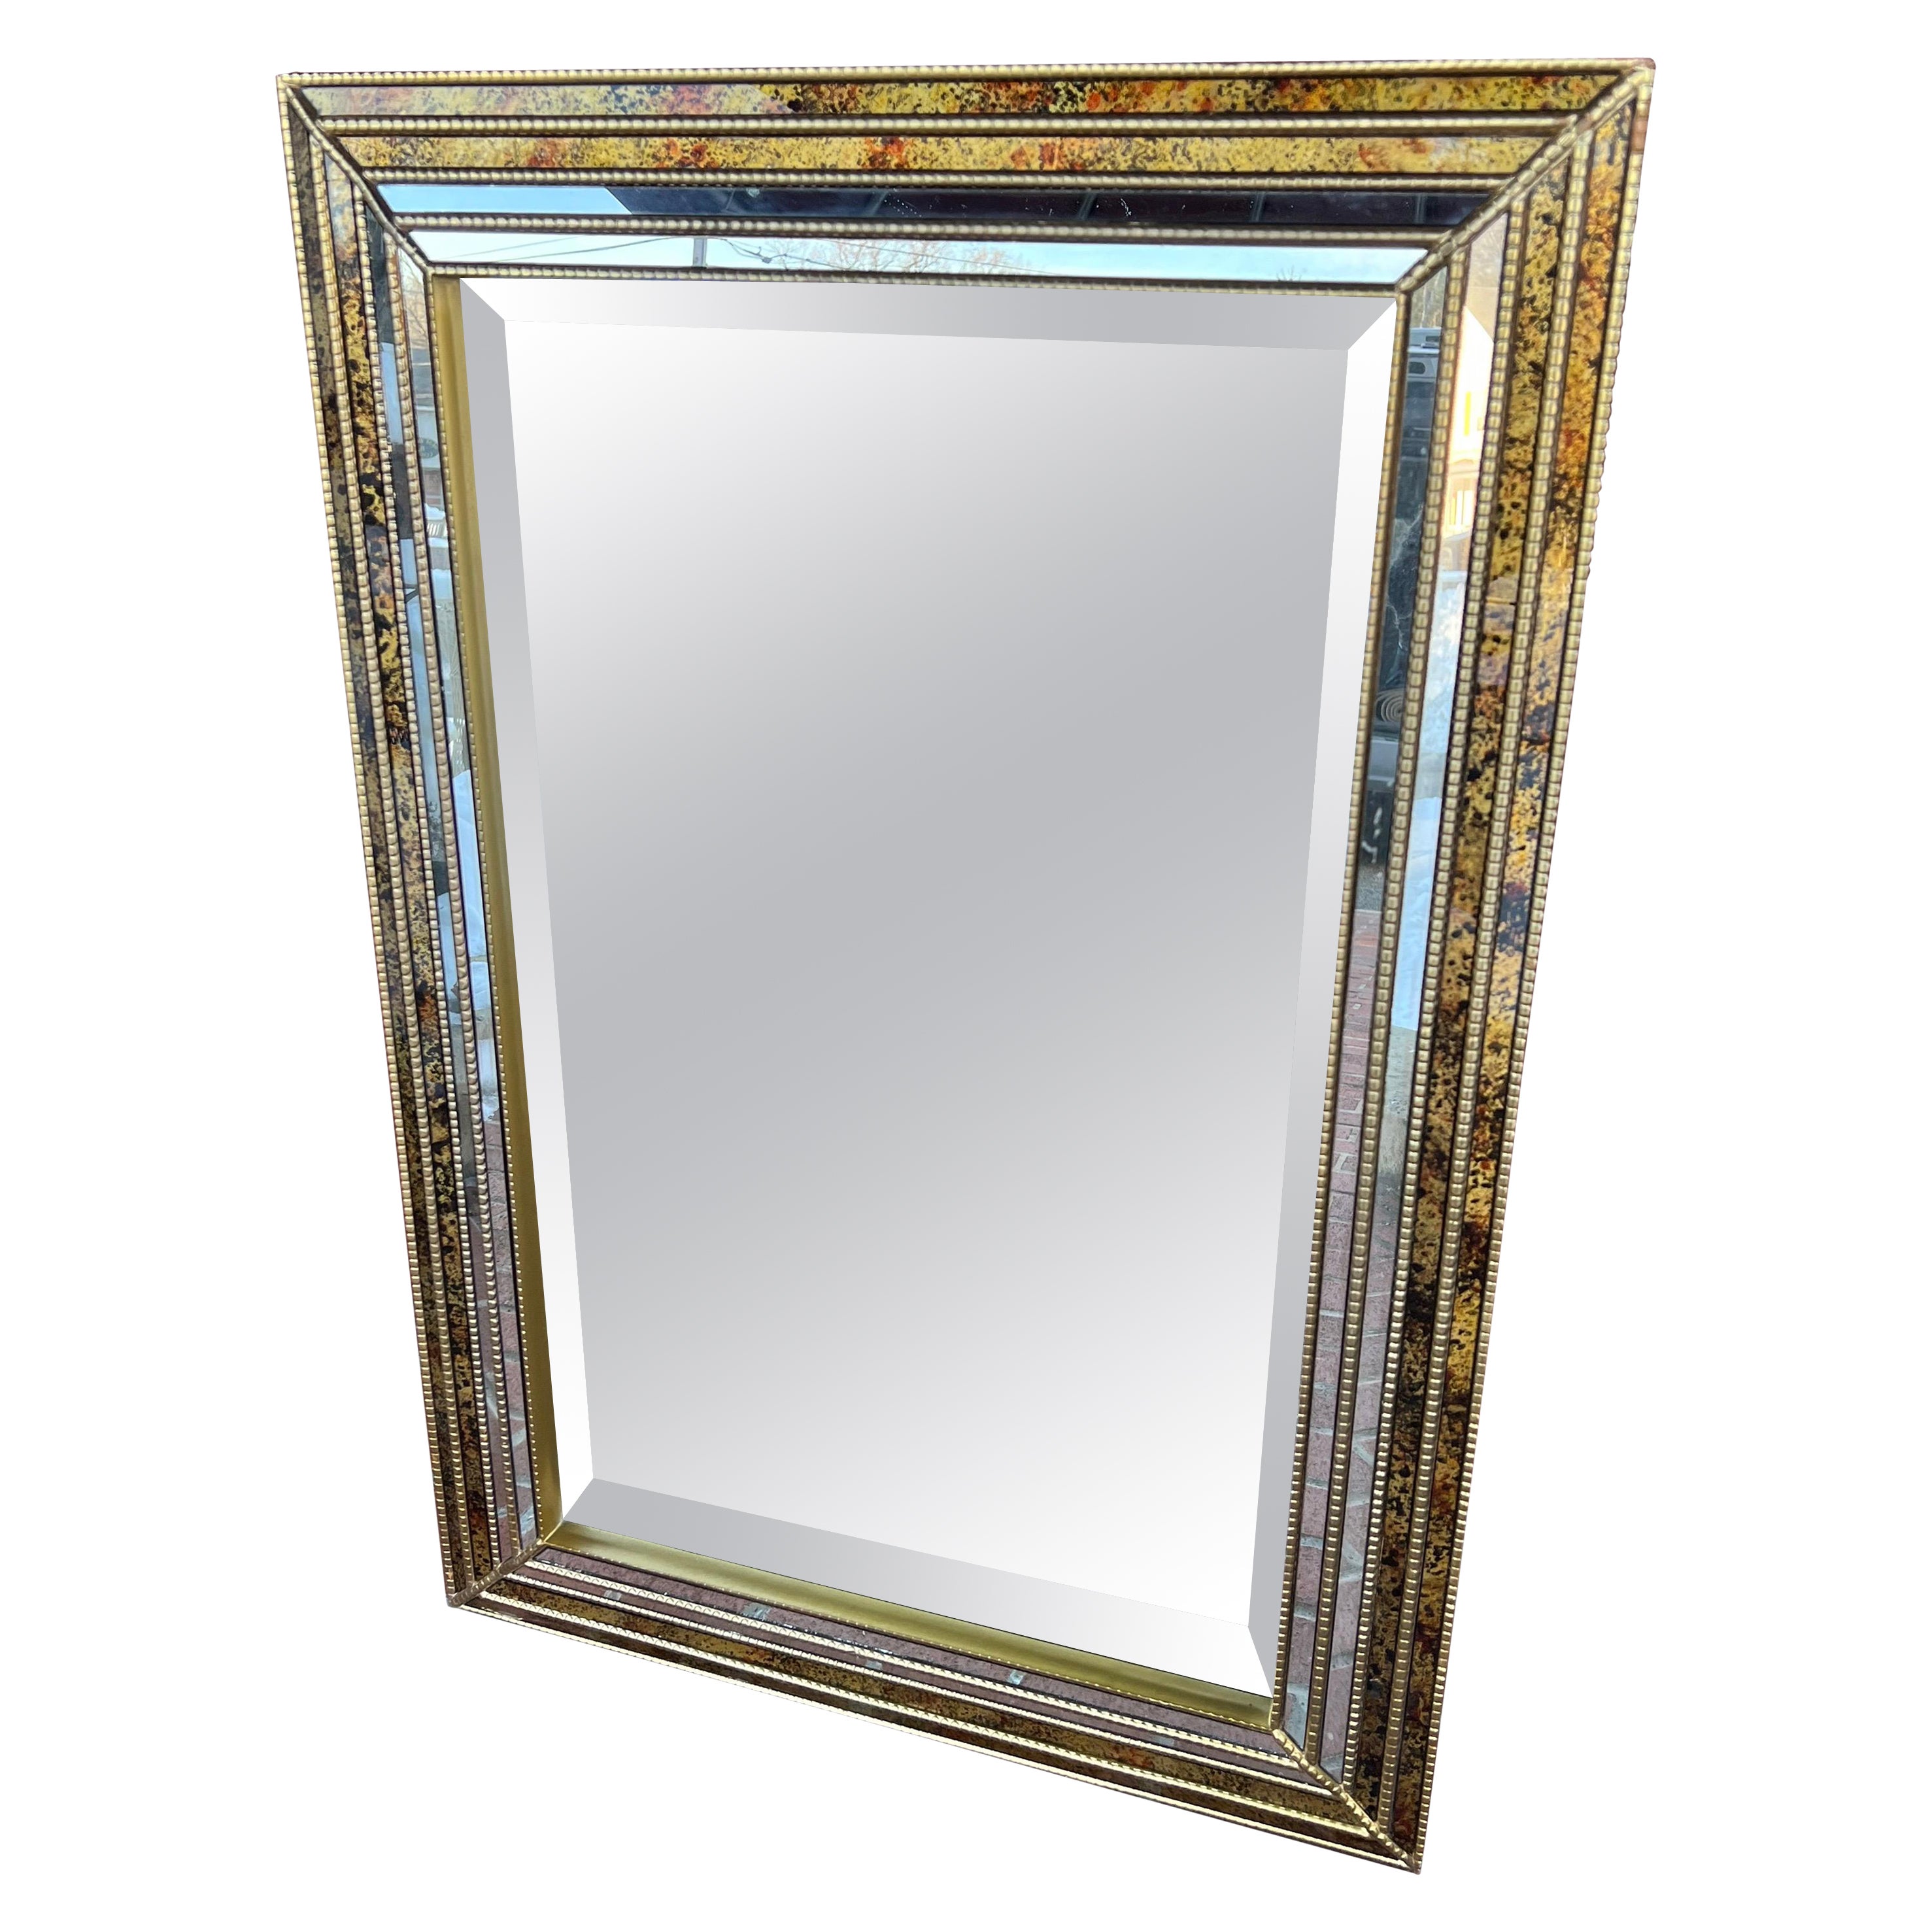 Oil Drip Beveled Mirror Attributed to LaBarge